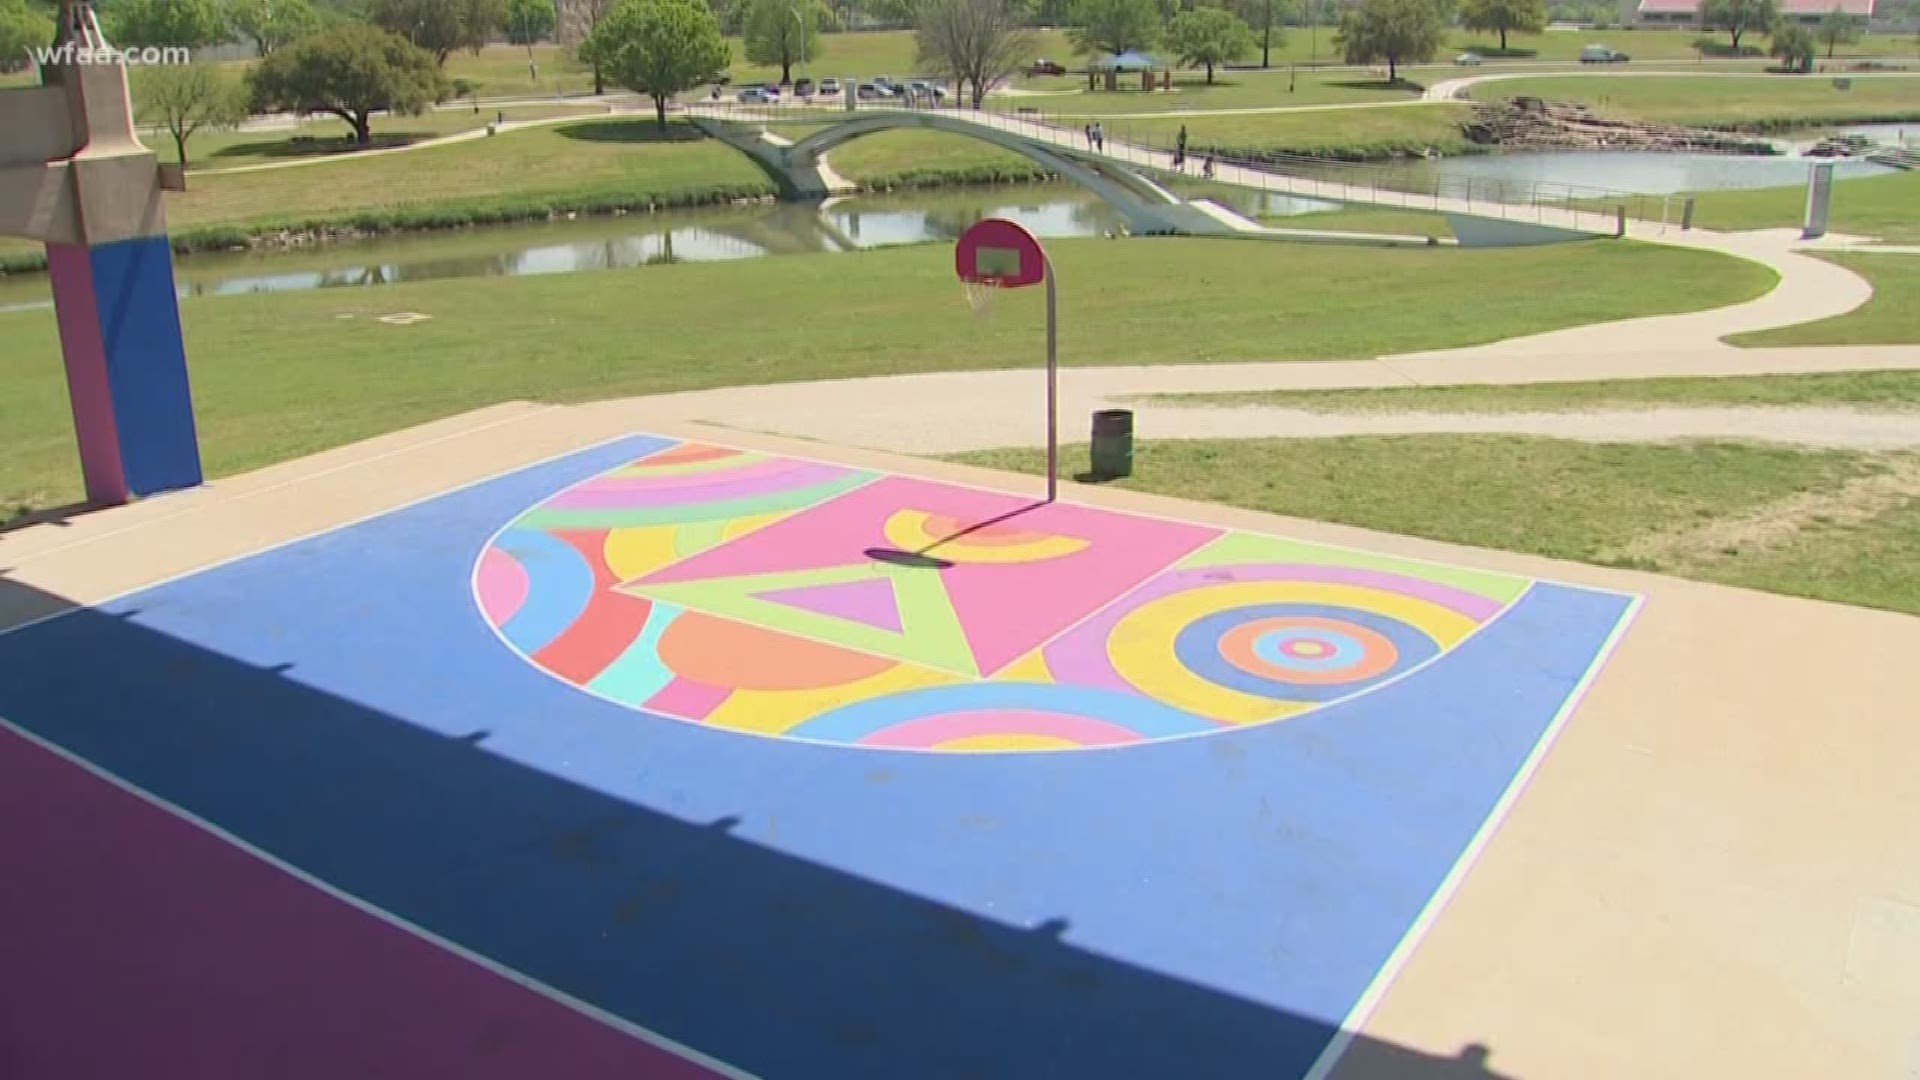 You might have noticed new paint and playground equipment at the Fort Worth park.